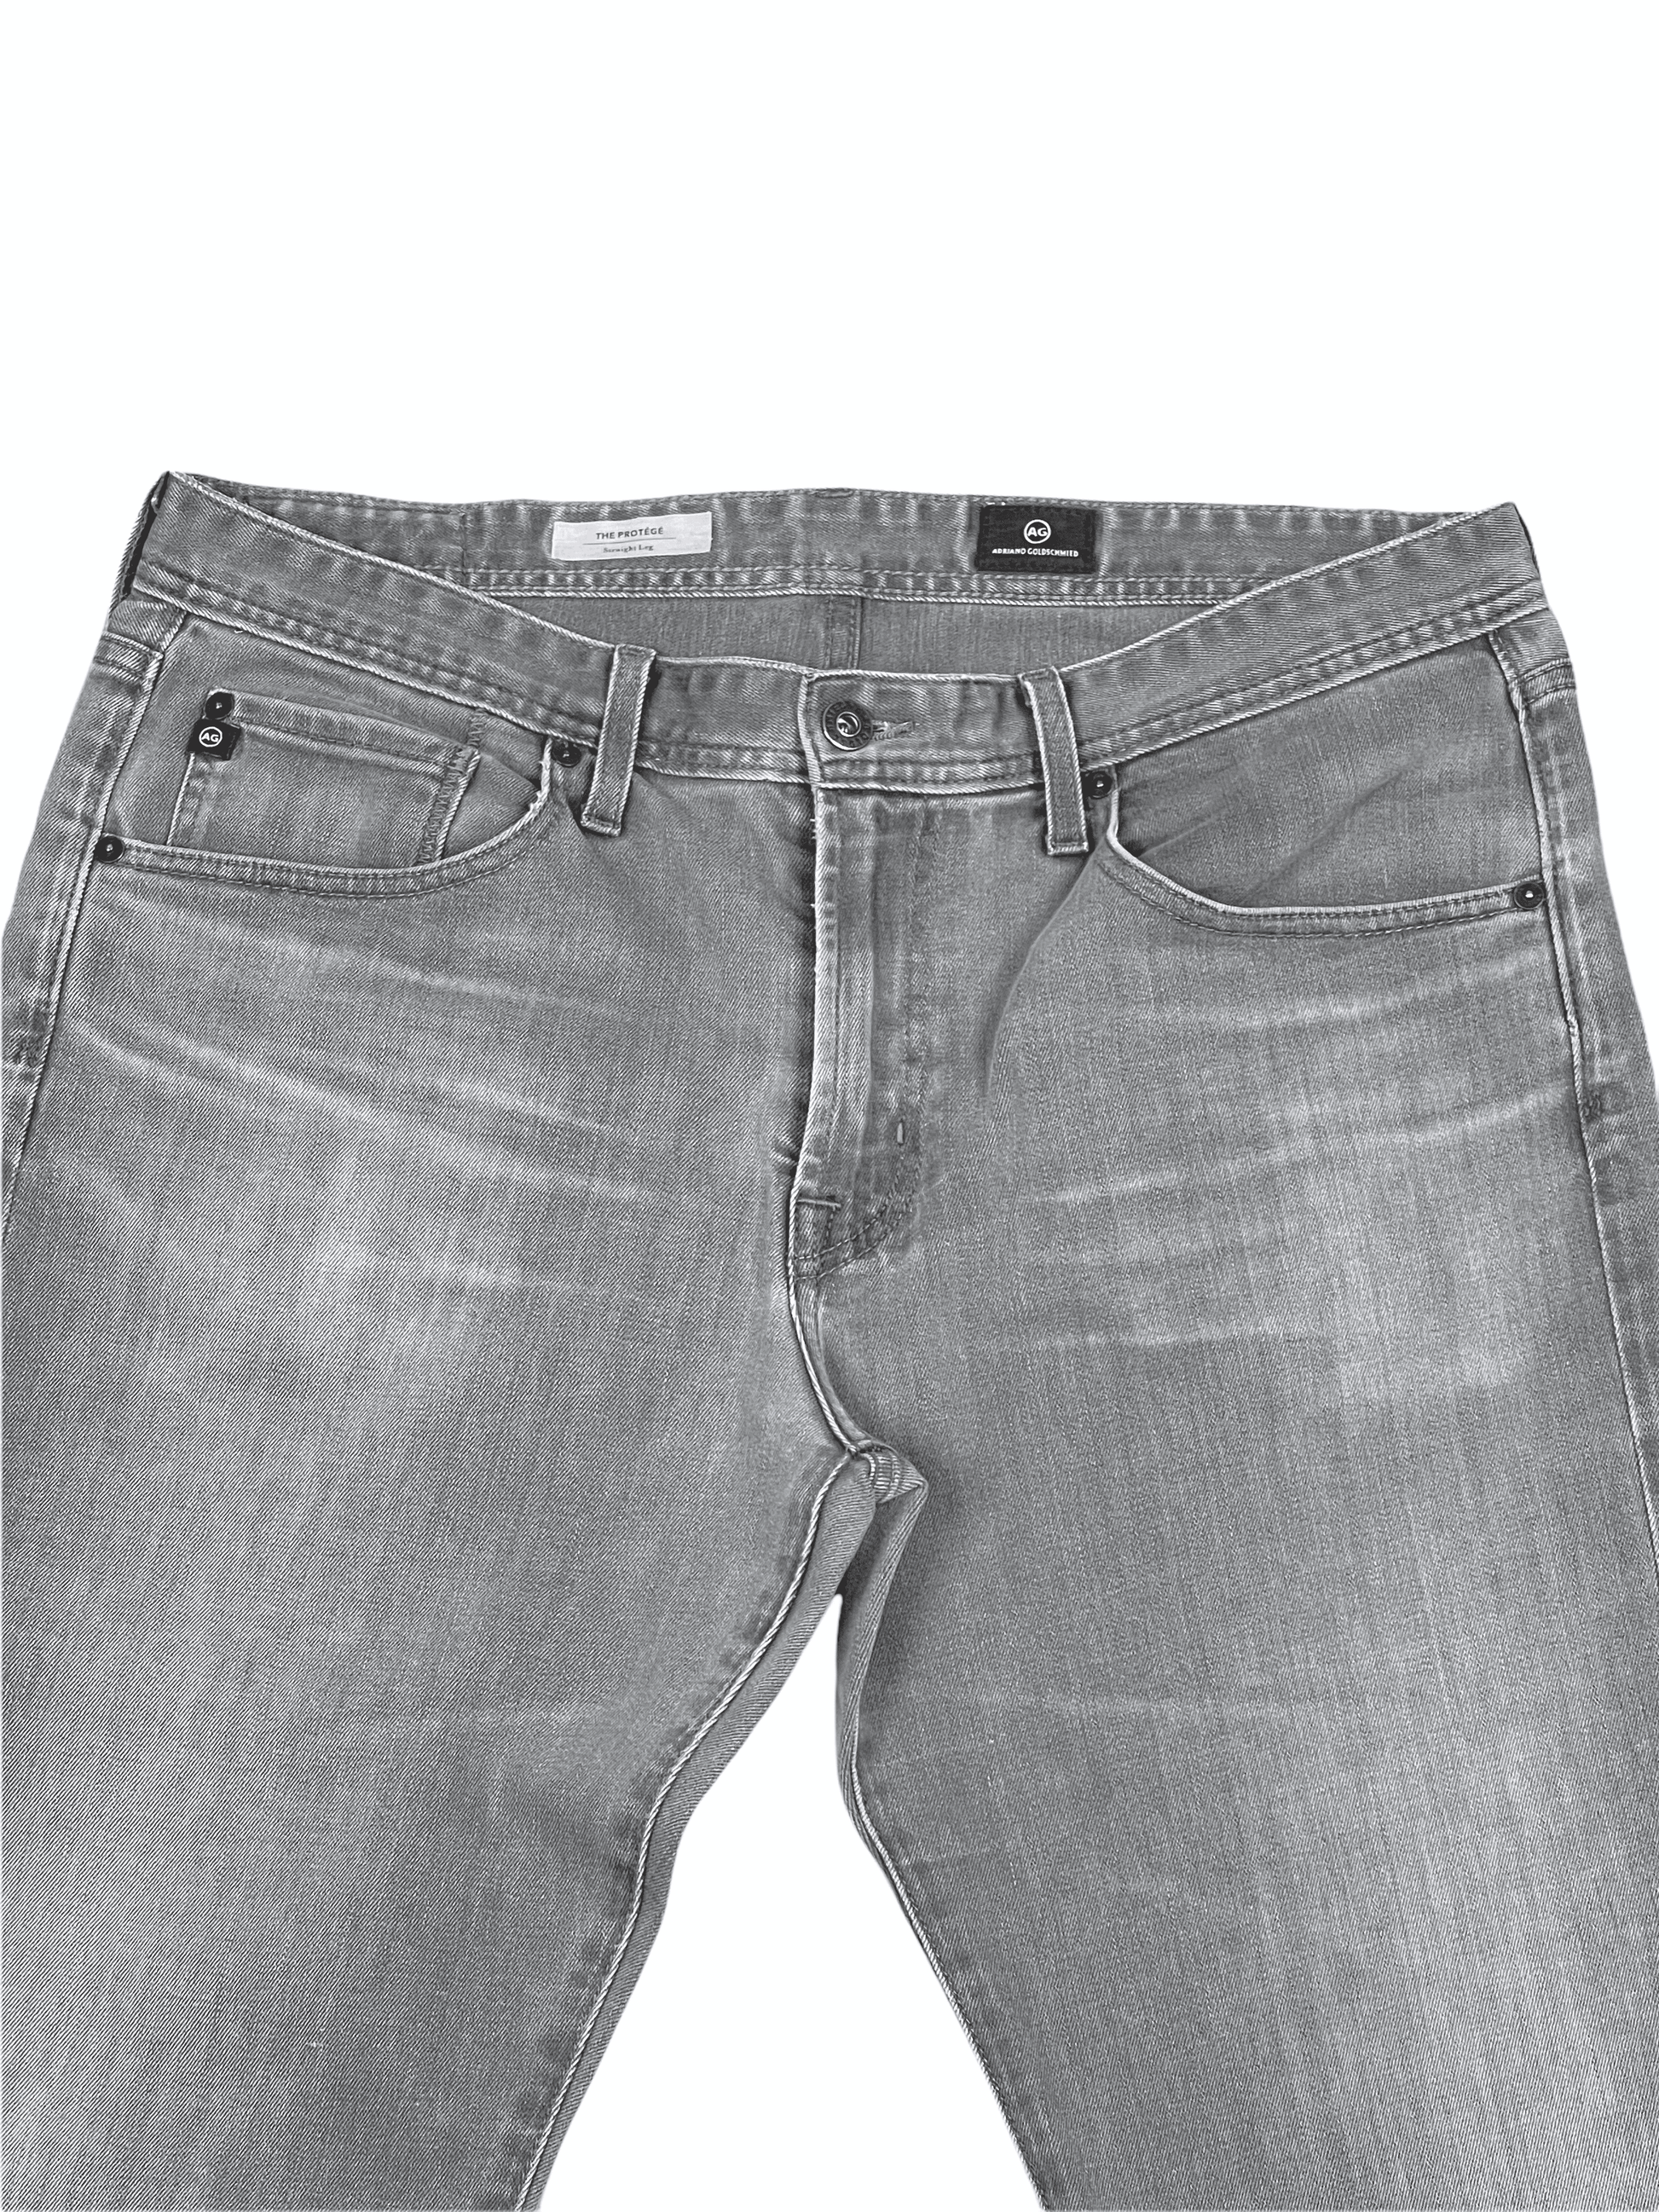 AG Grey Wash Denim 34 x 34 - Genuine Design Luxury Consignment for Men. New & Pre-Owned Clothing, Shoes, & Accessories. Calgary, Canada